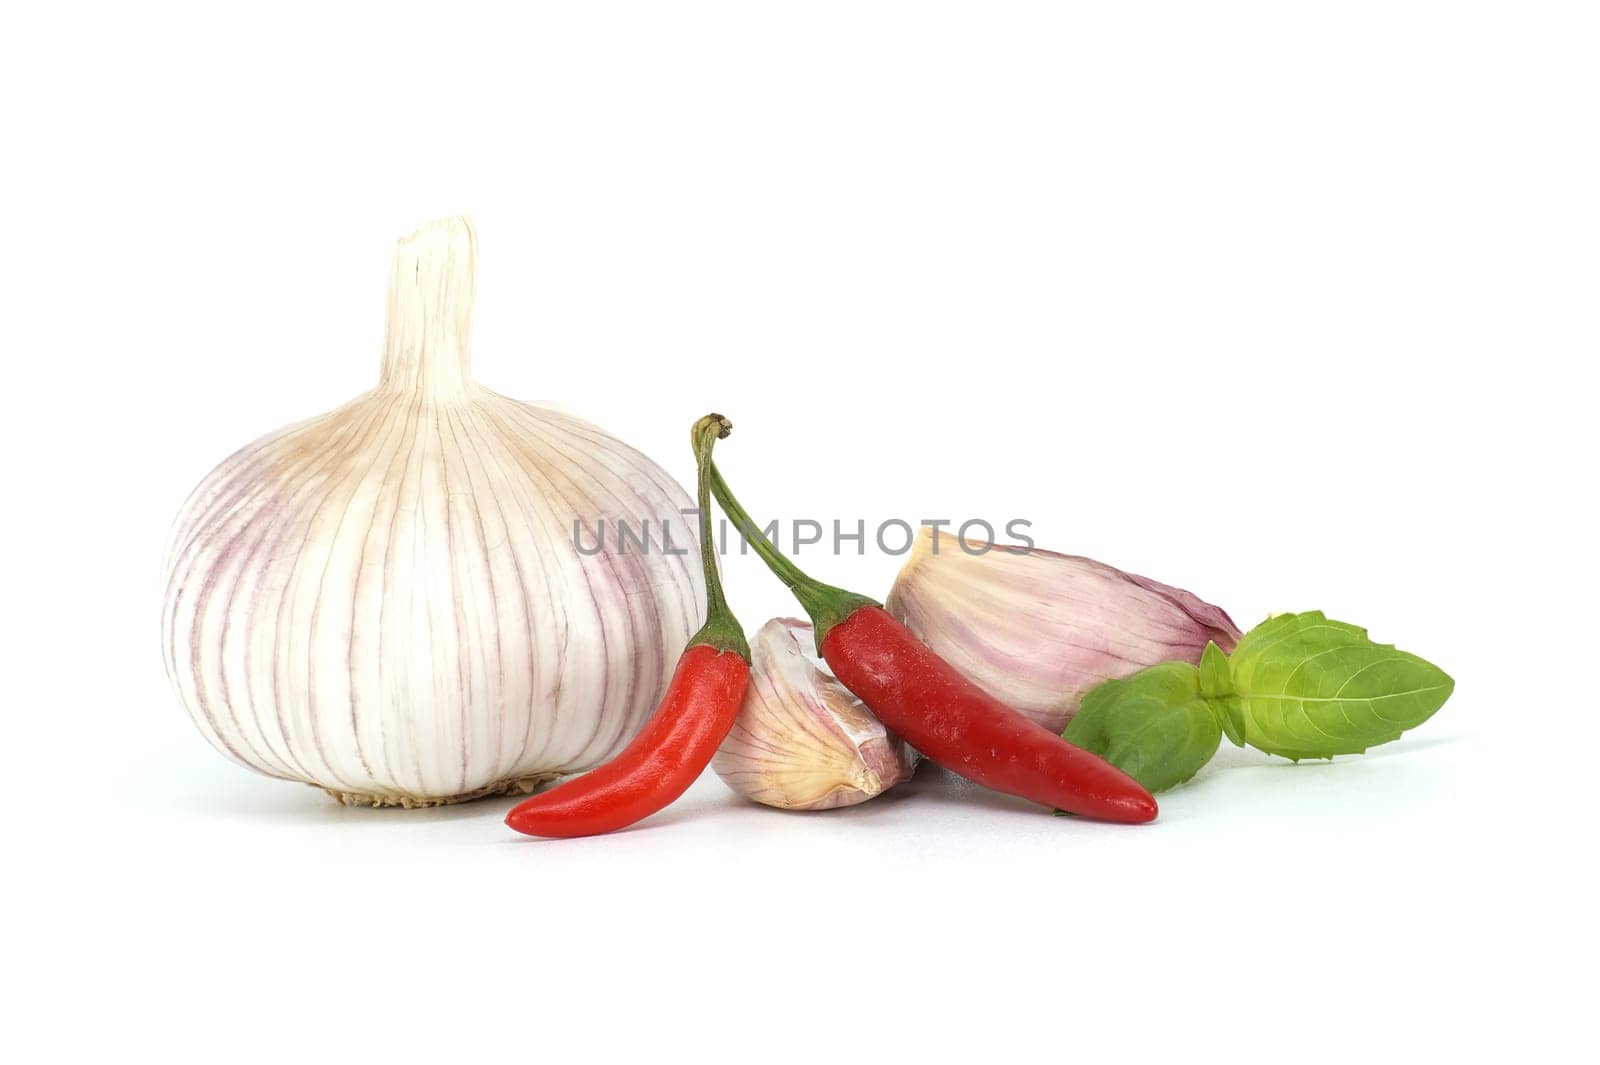 Common culinary ingredients herbs and spices on white by NetPix